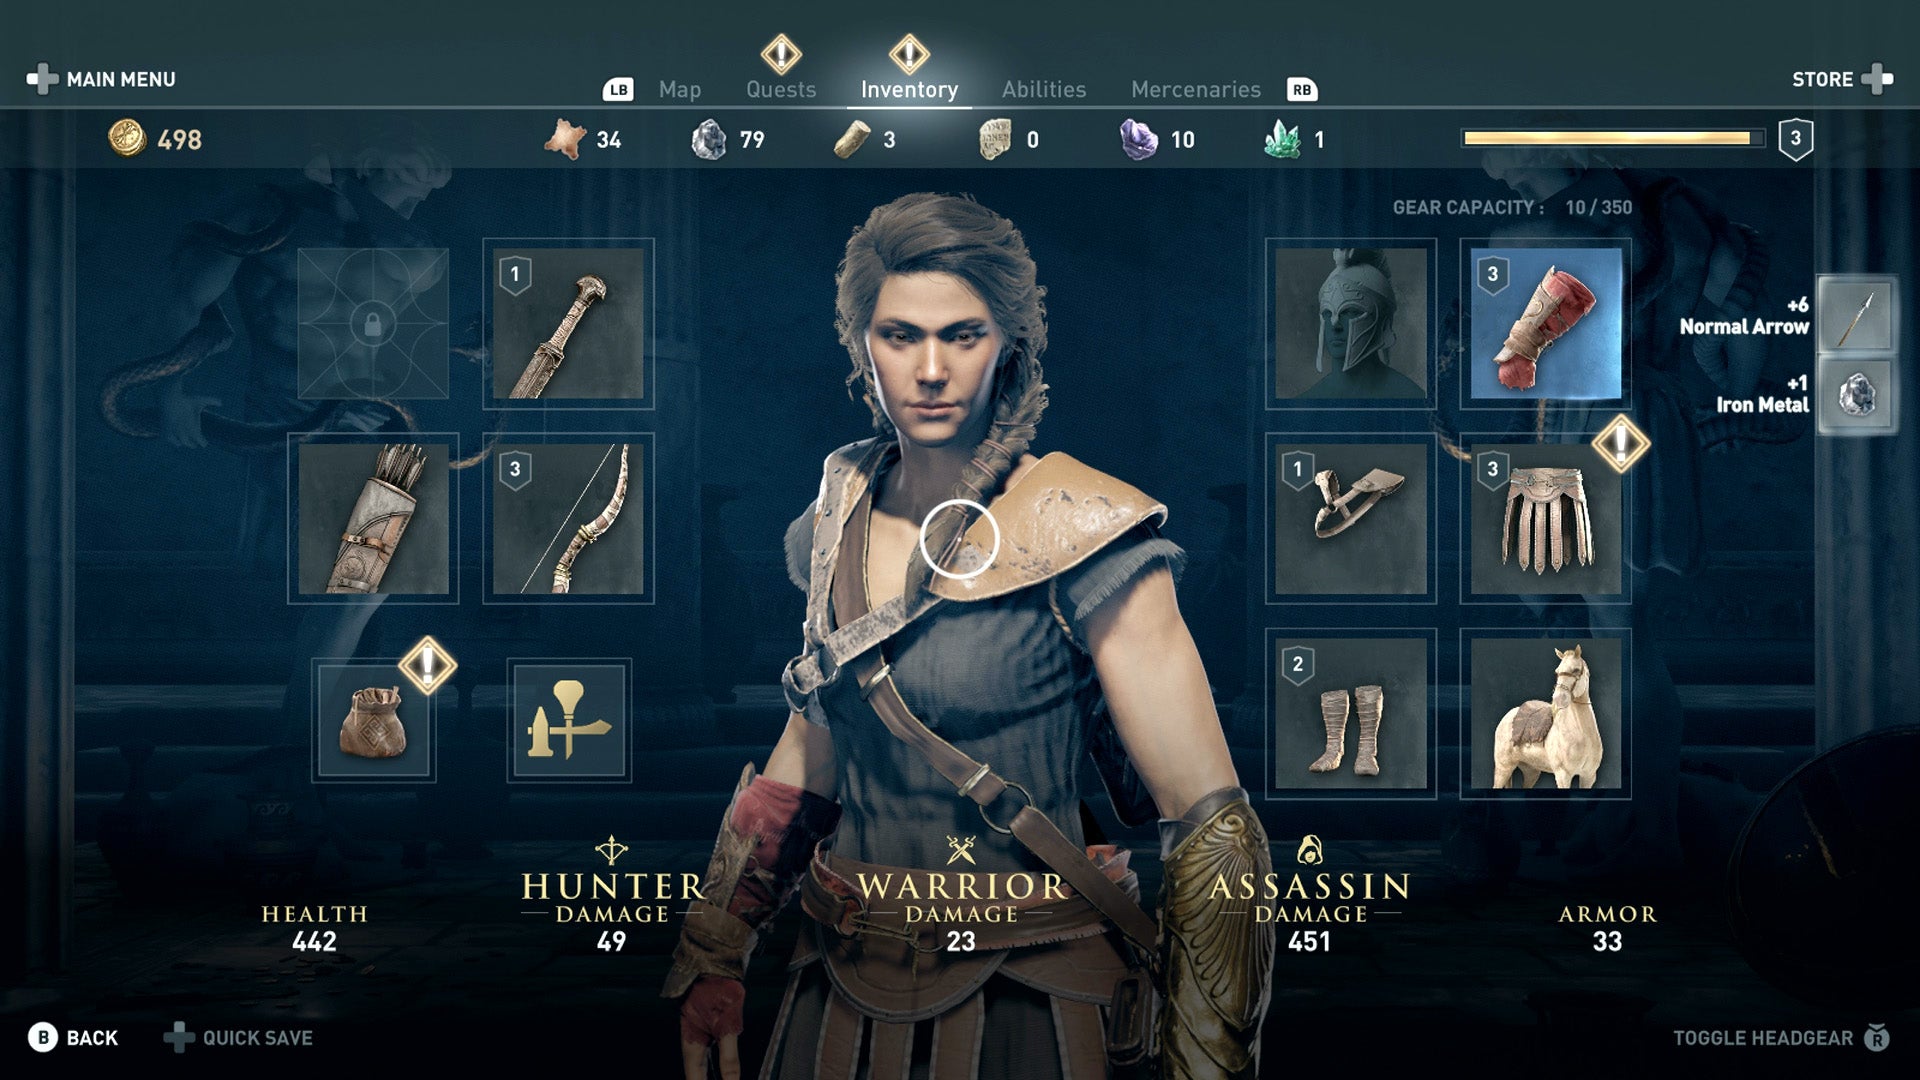 Assassin's Creed Odyssey inventory: to get the best weapons, legendary armour | Paper